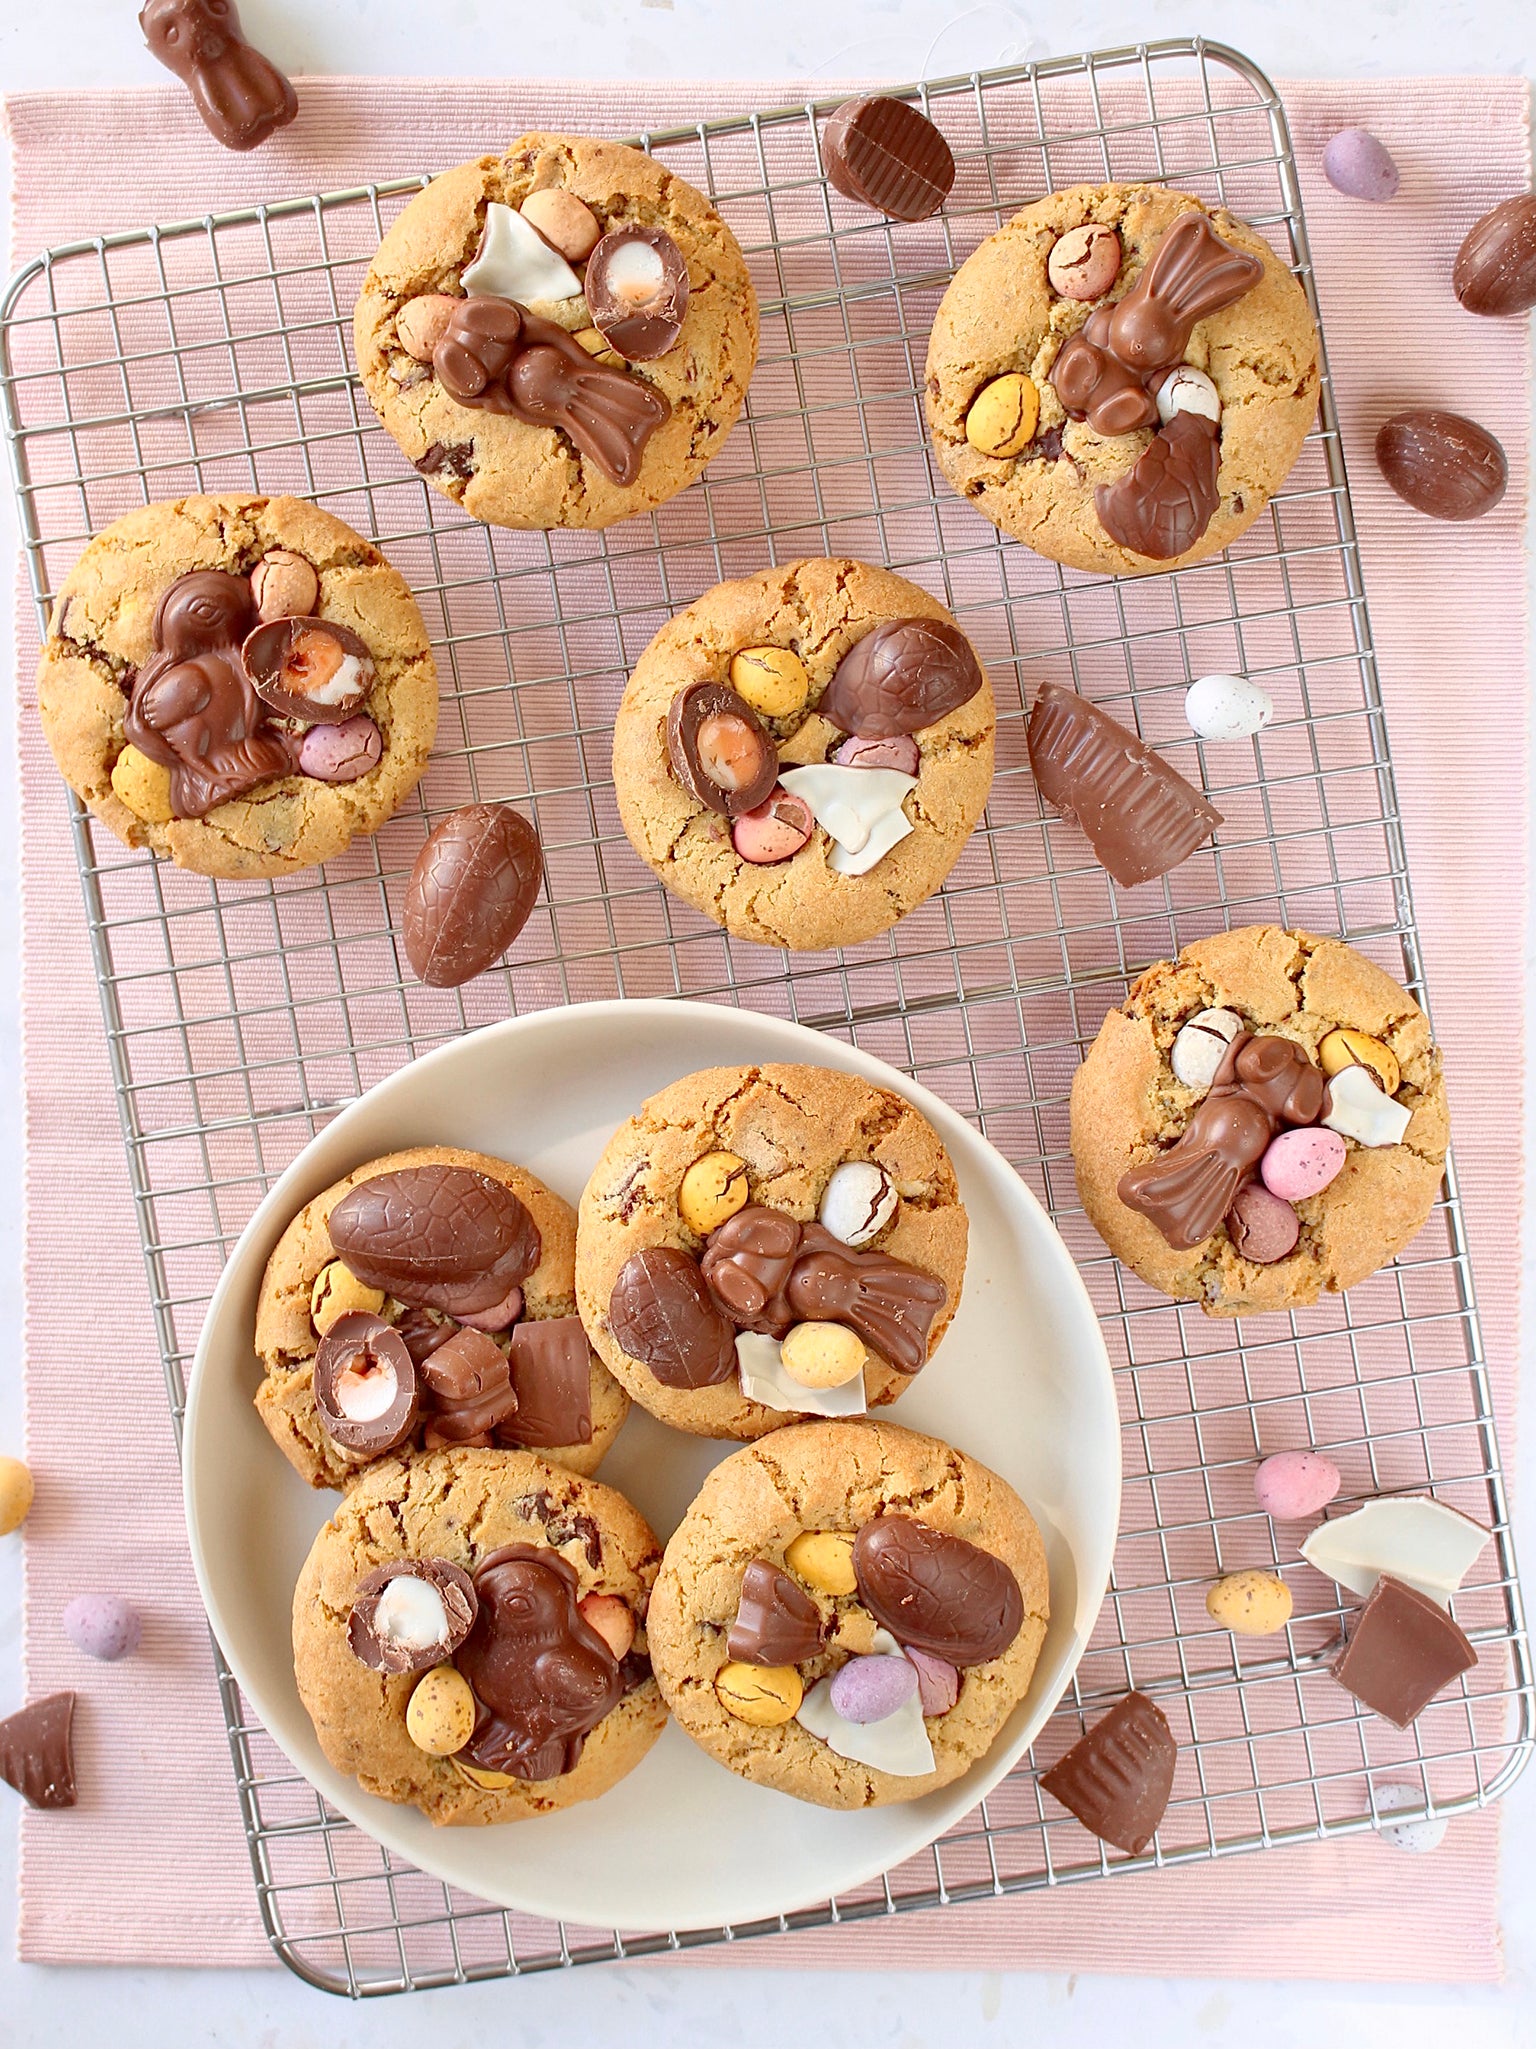 Repurpose your Easter eggs with this foolproof cookie recipe